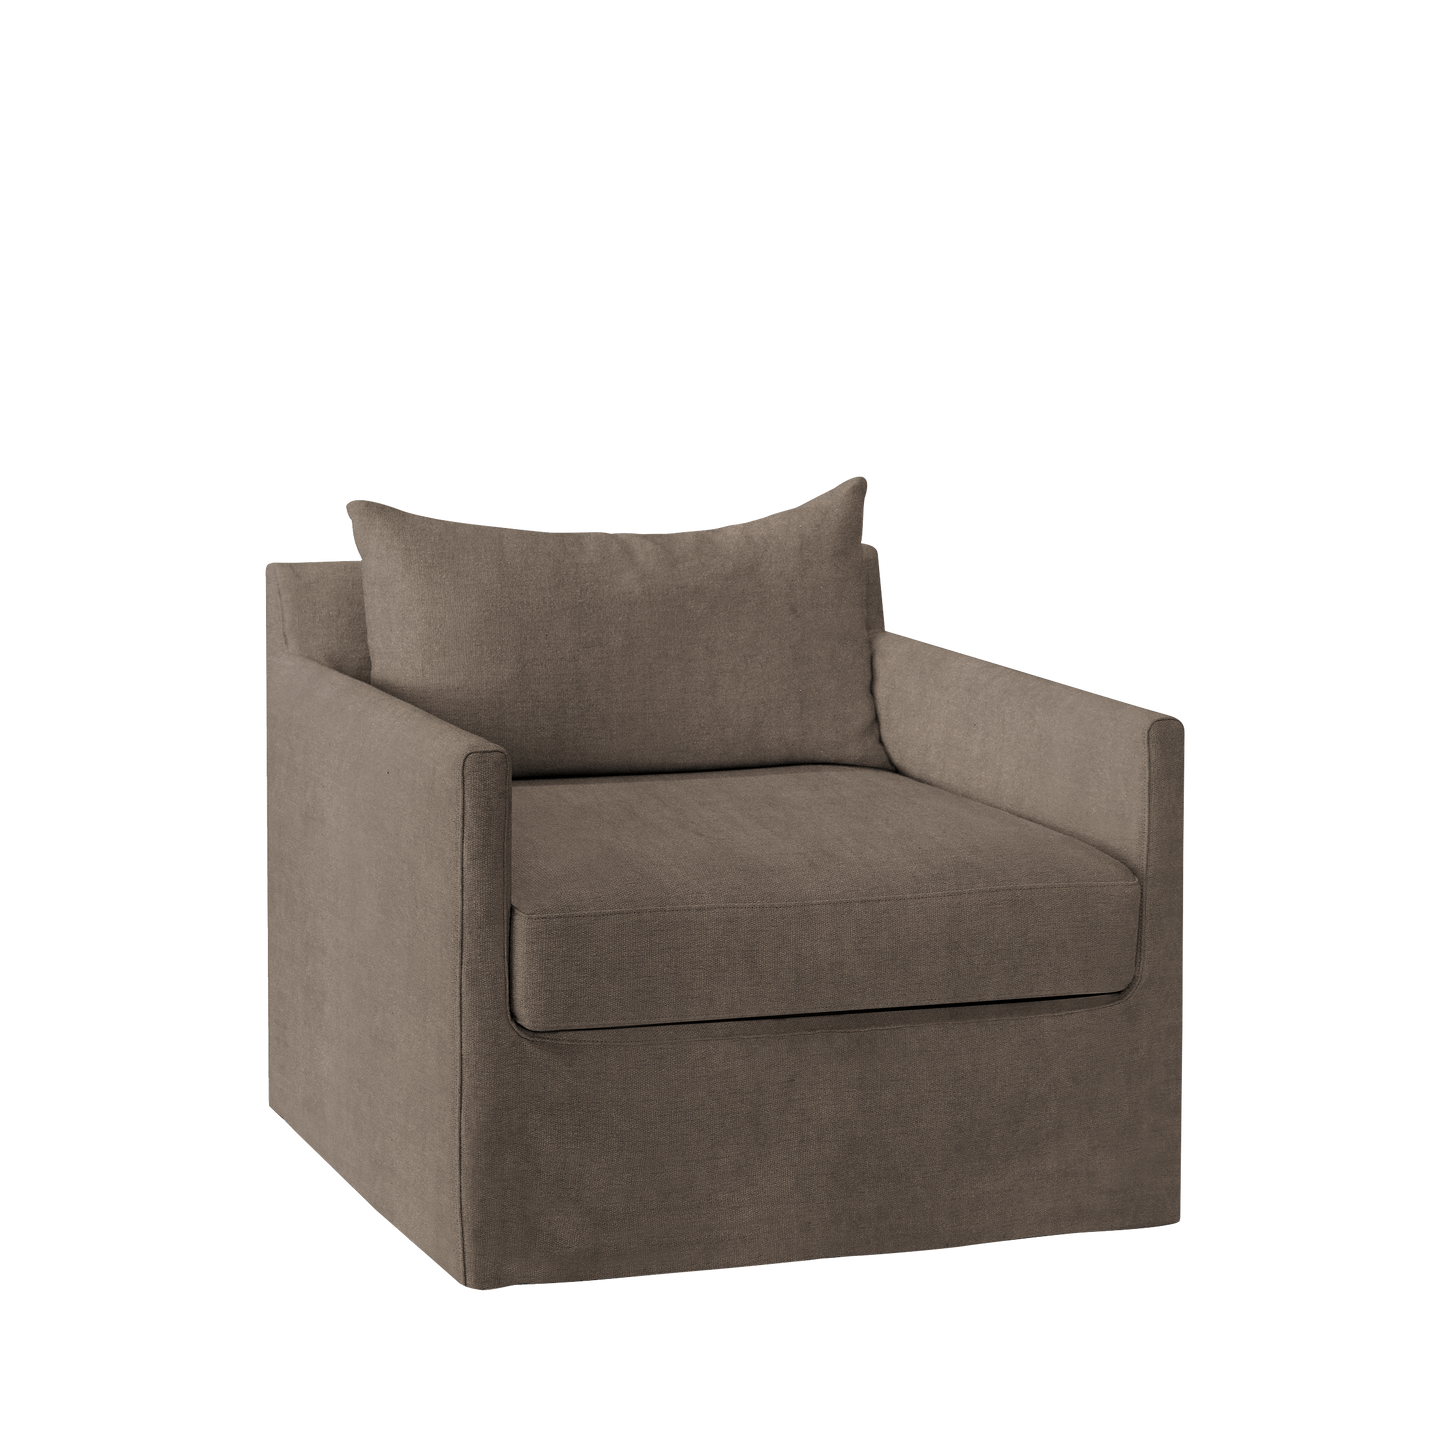 Extra wide Alba lounge chair with suede grey textile